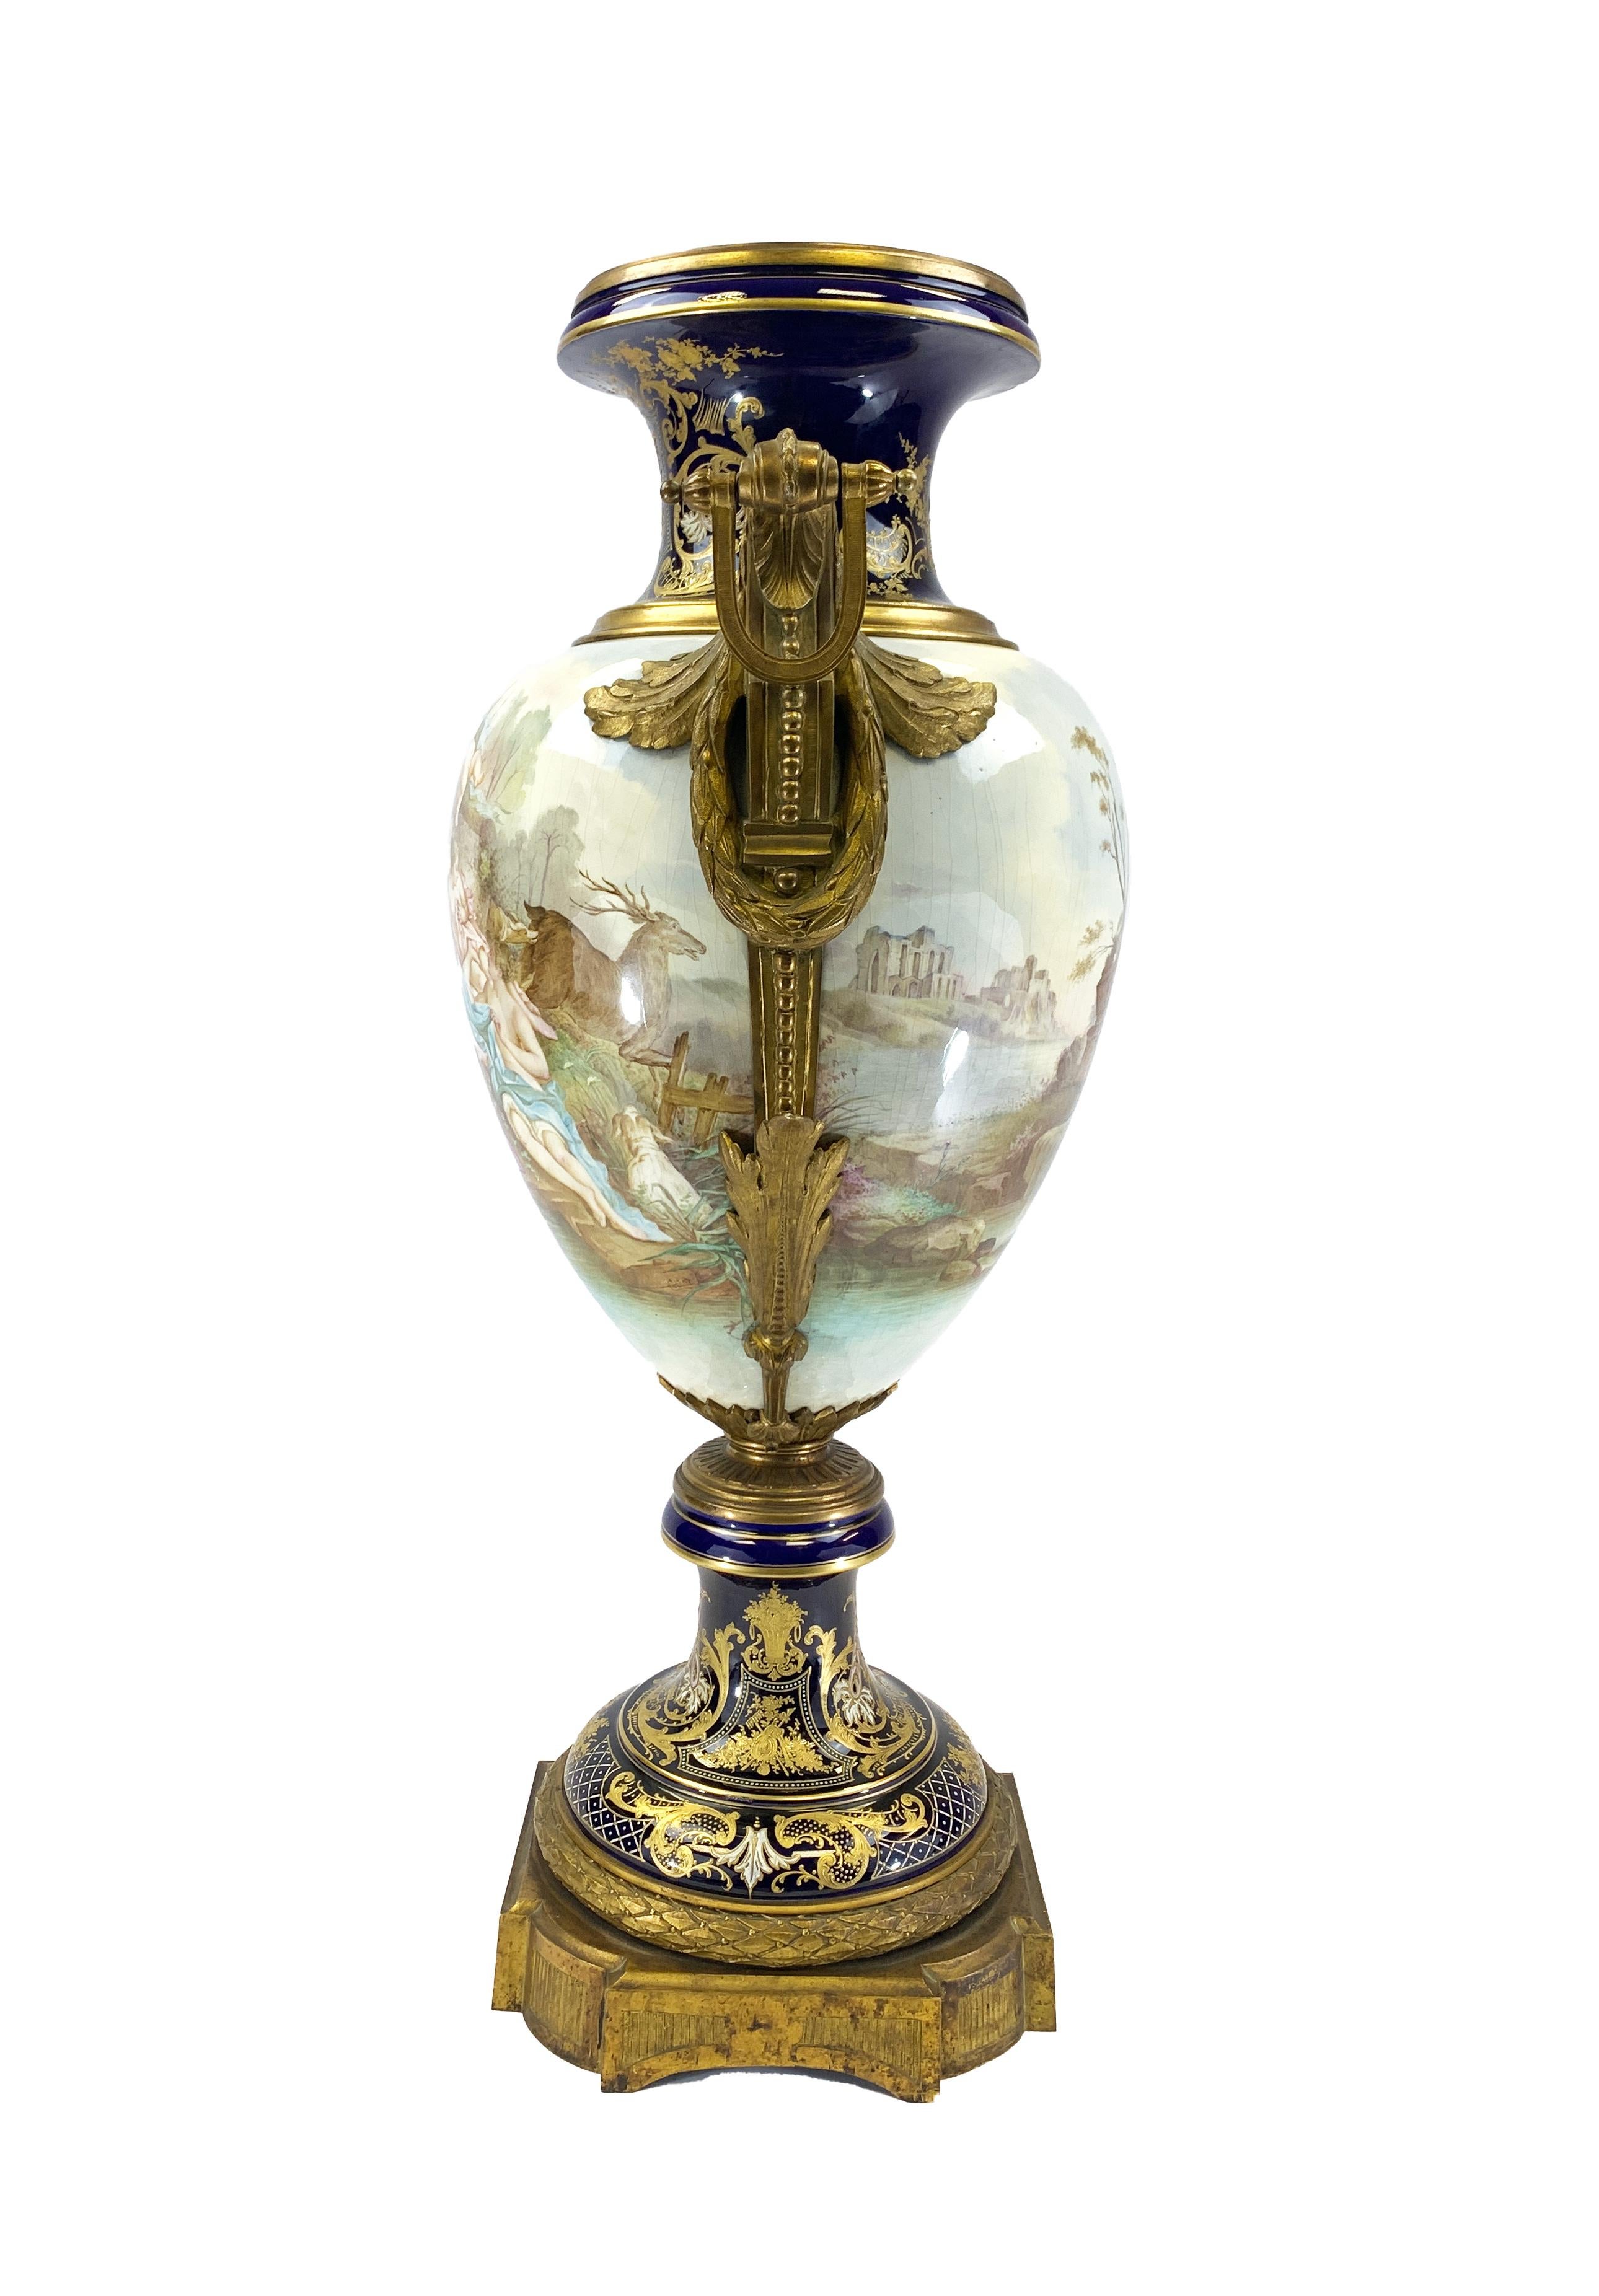 Impressive 19th century French Sevres style porcelain vase no lid, raised on a square ormolu base, The front panel is hand painted to represent a mythological scene, Gilt bronze handles are attached to the vase, Signed by the artist Collot. 
 